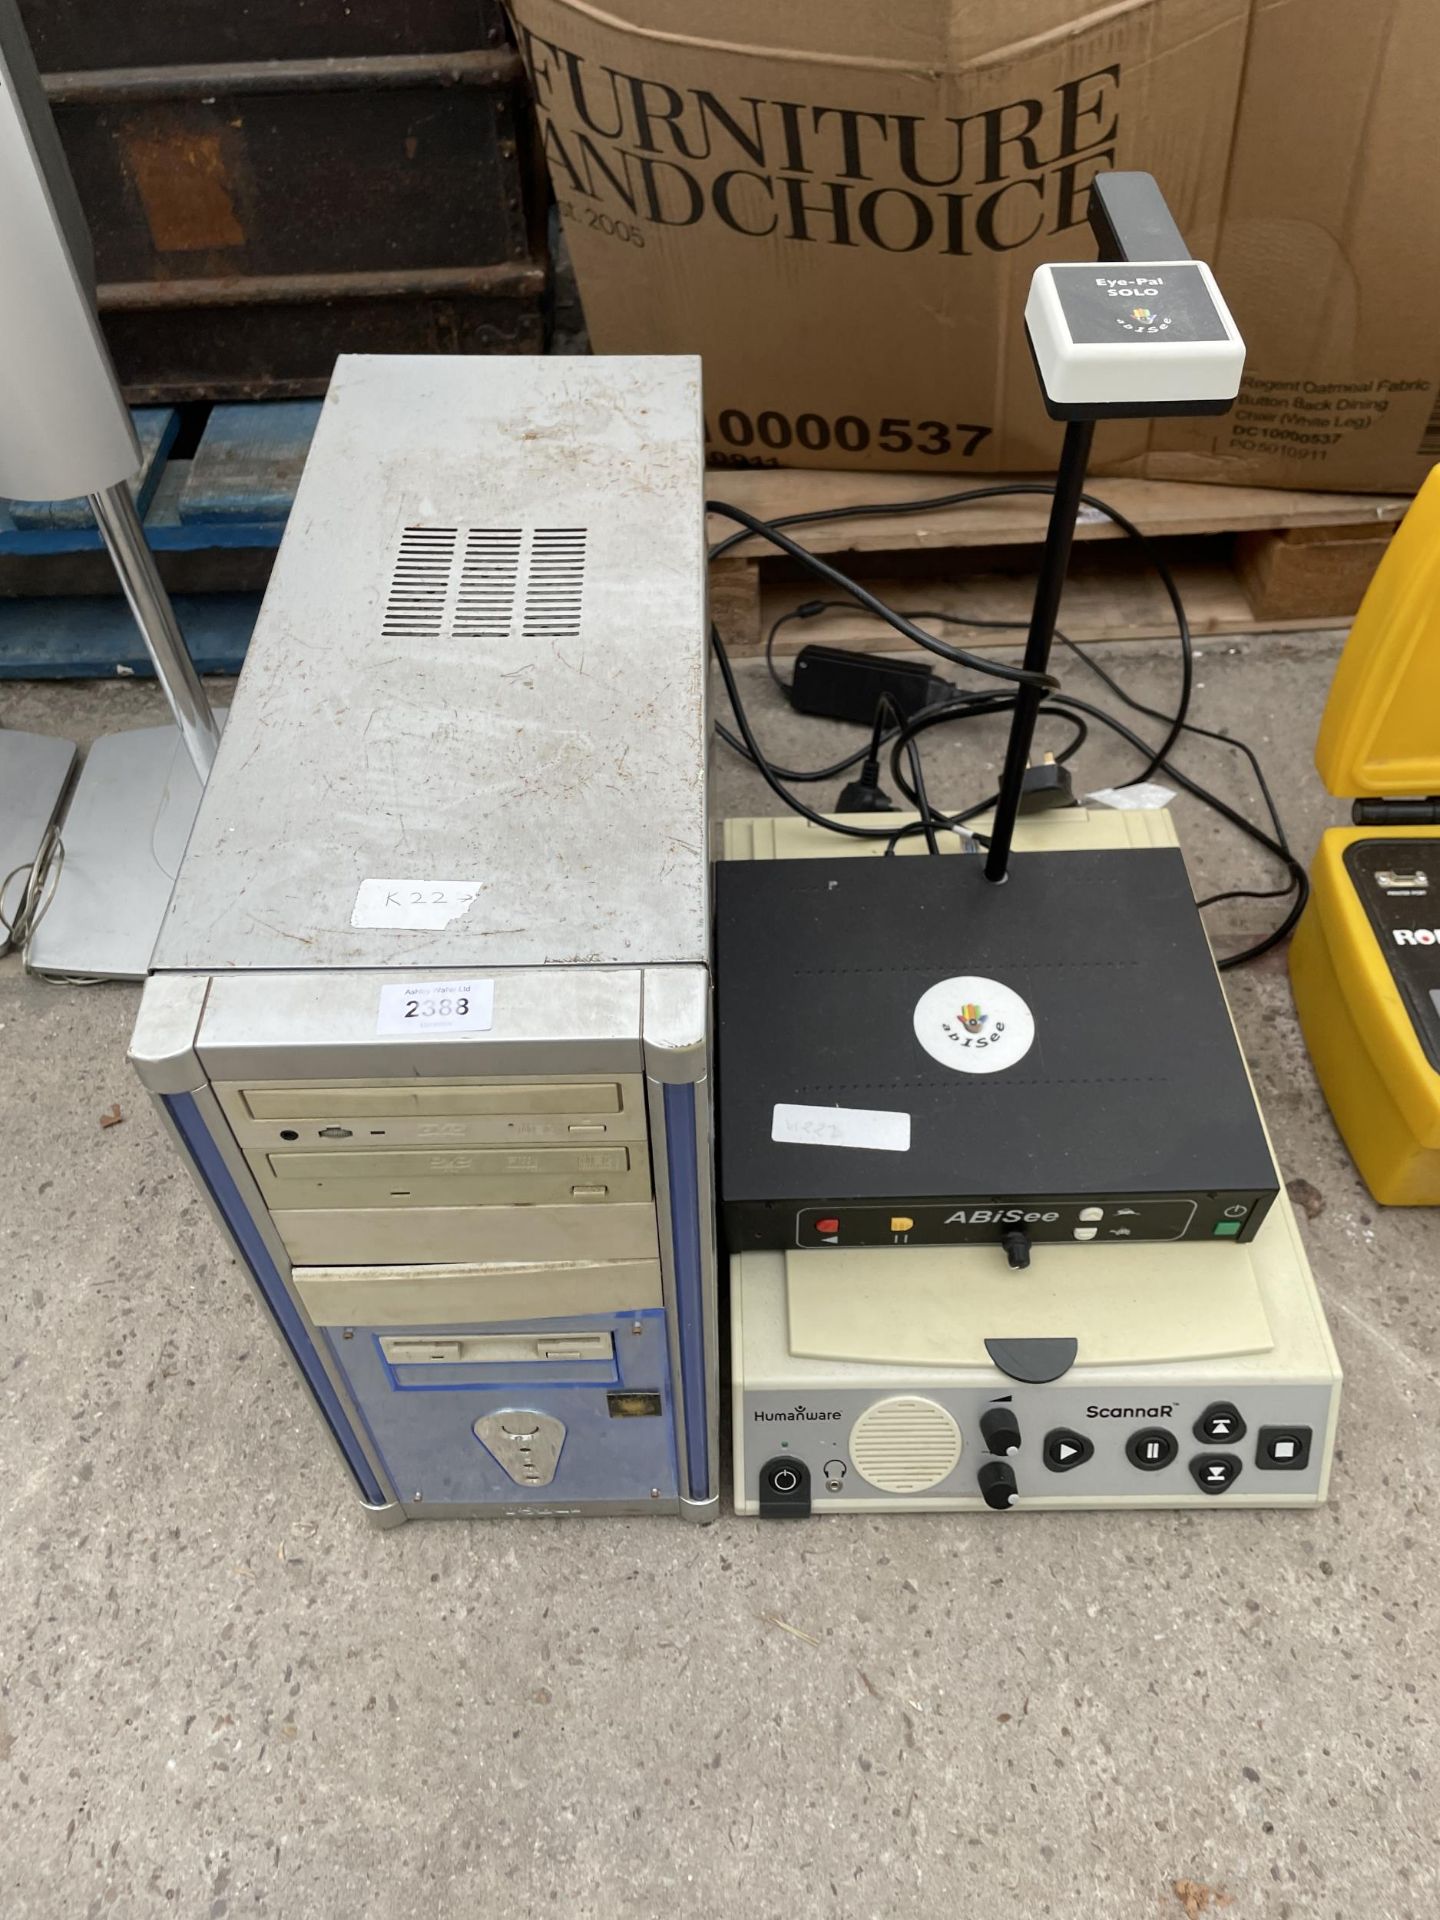 AN ASSORTMENT OF ITEMS TO INCLUDE A COMPUTER TOWER AND A HUMANWARE SCANNAR ETC